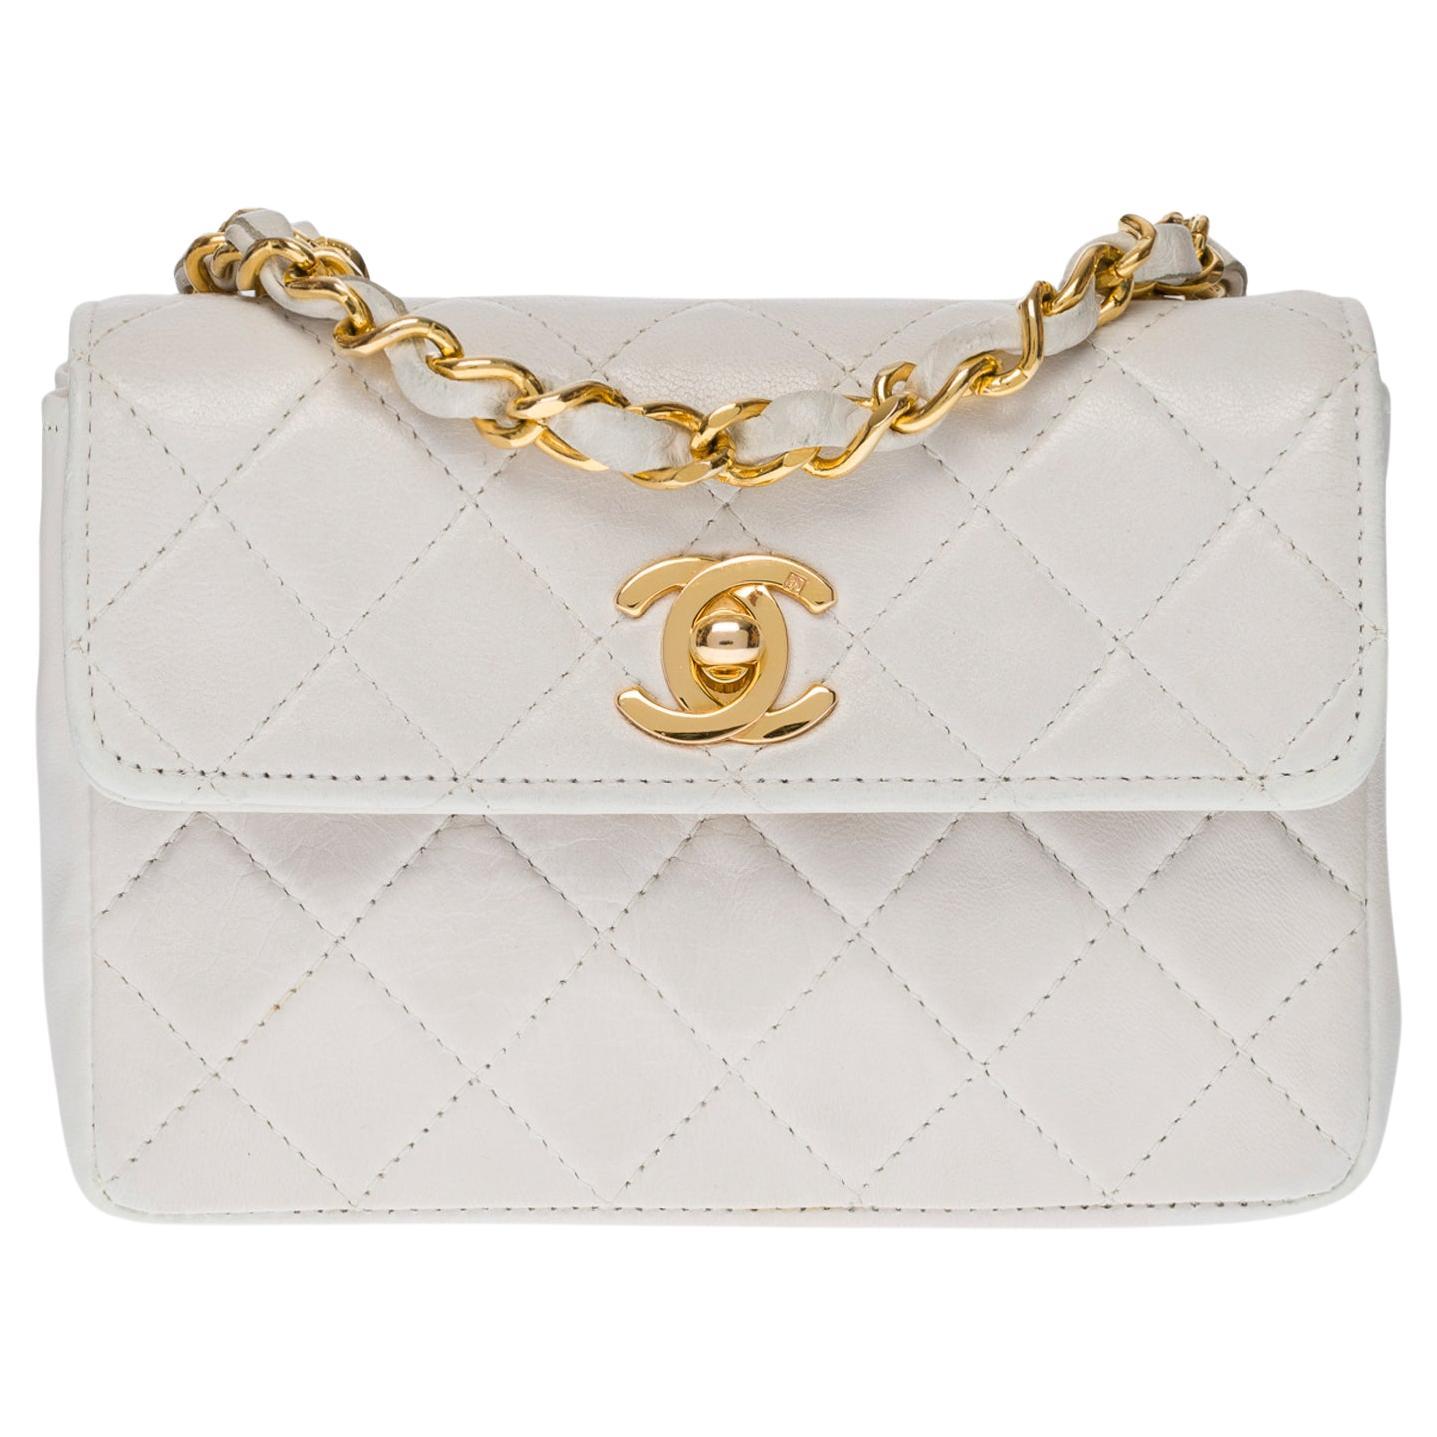 Gorgeous Chanel Mini Classic flap shoulder bag in White quilted